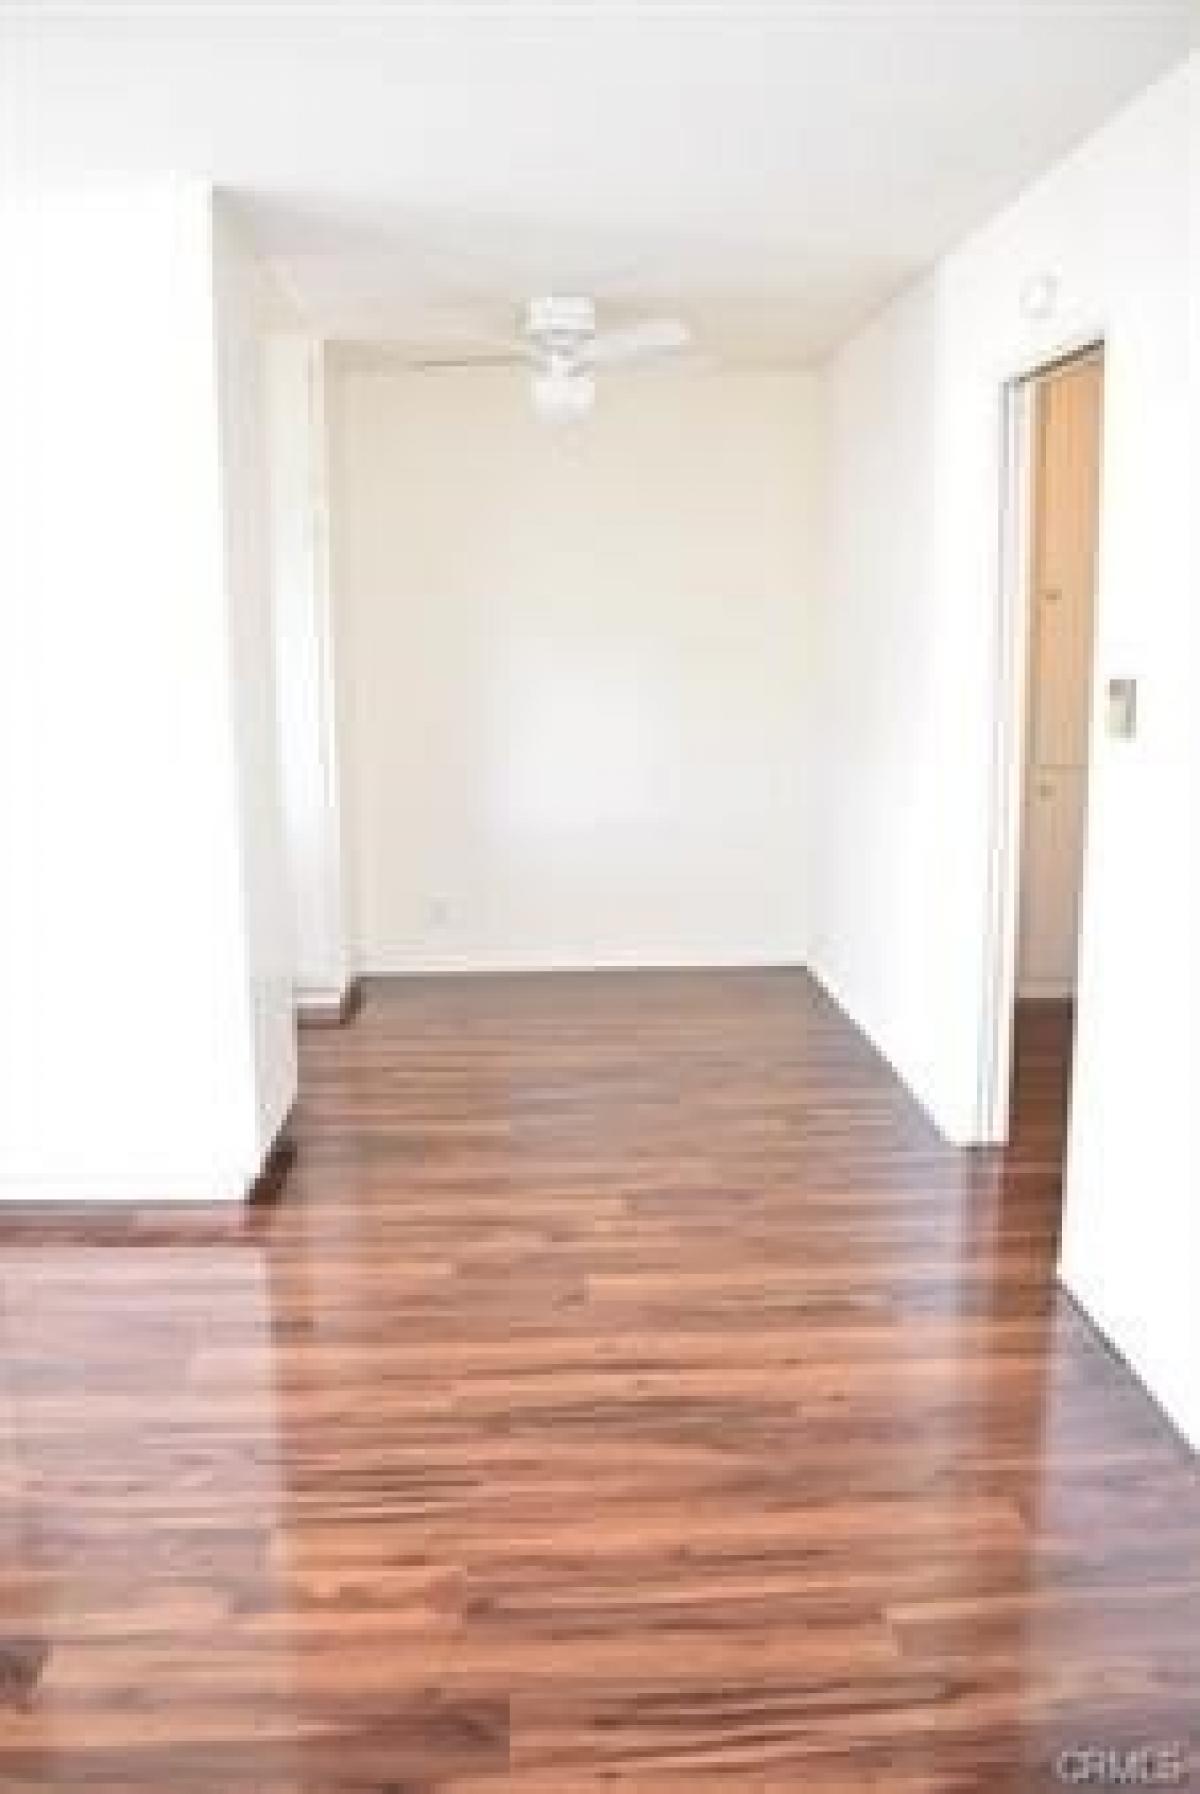 Picture of Apartment For Rent in Torrance, California, United States